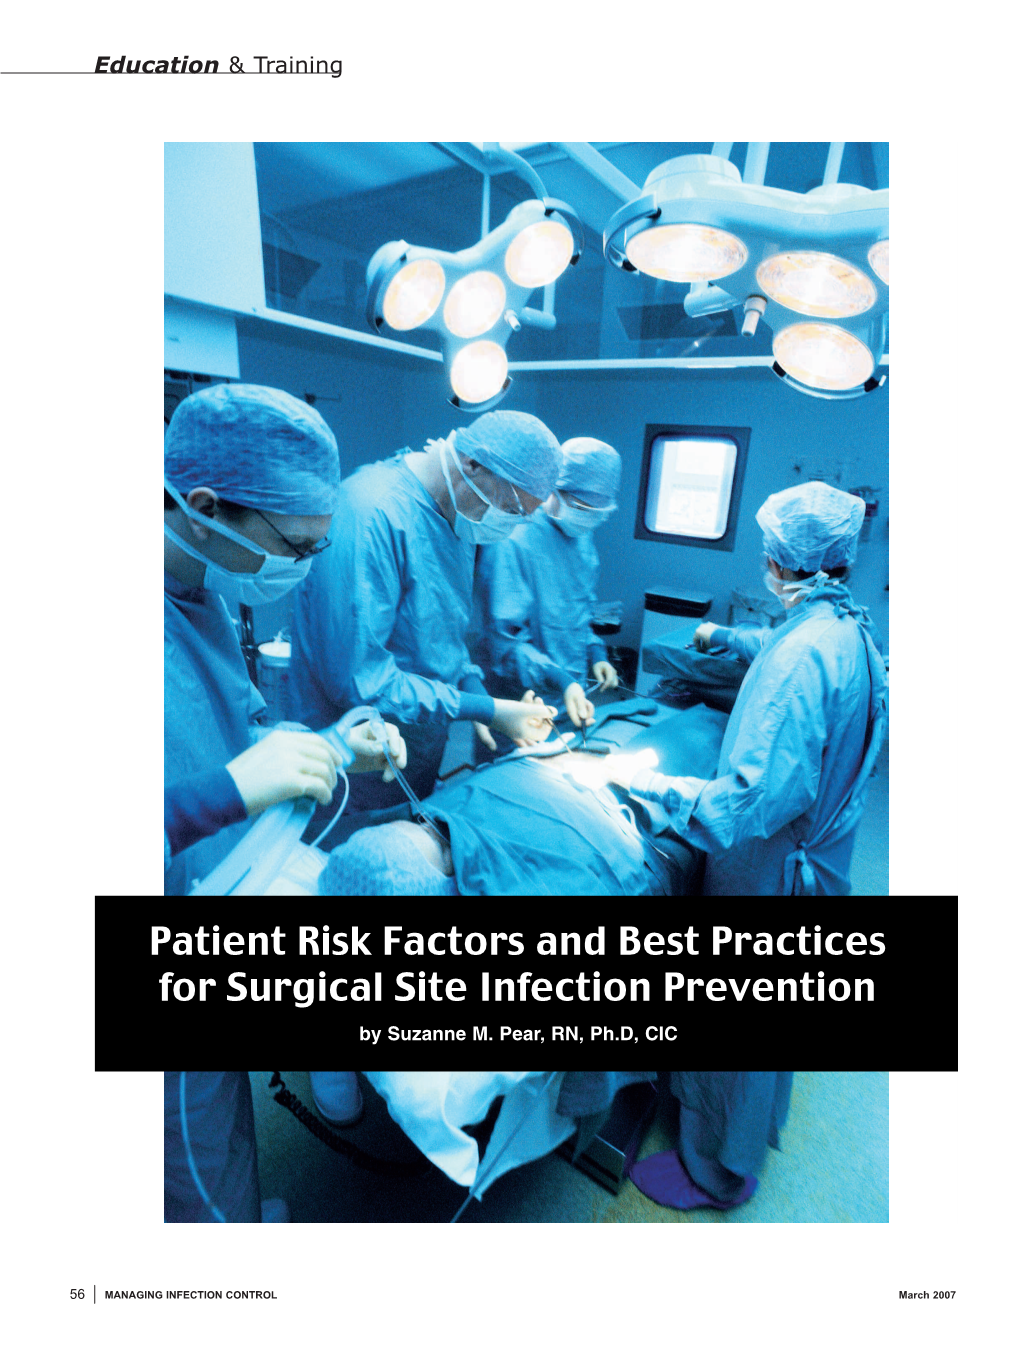 Patient Risk Factors and Best Practices for Surgical Site Infection Prevention by Suzanne M